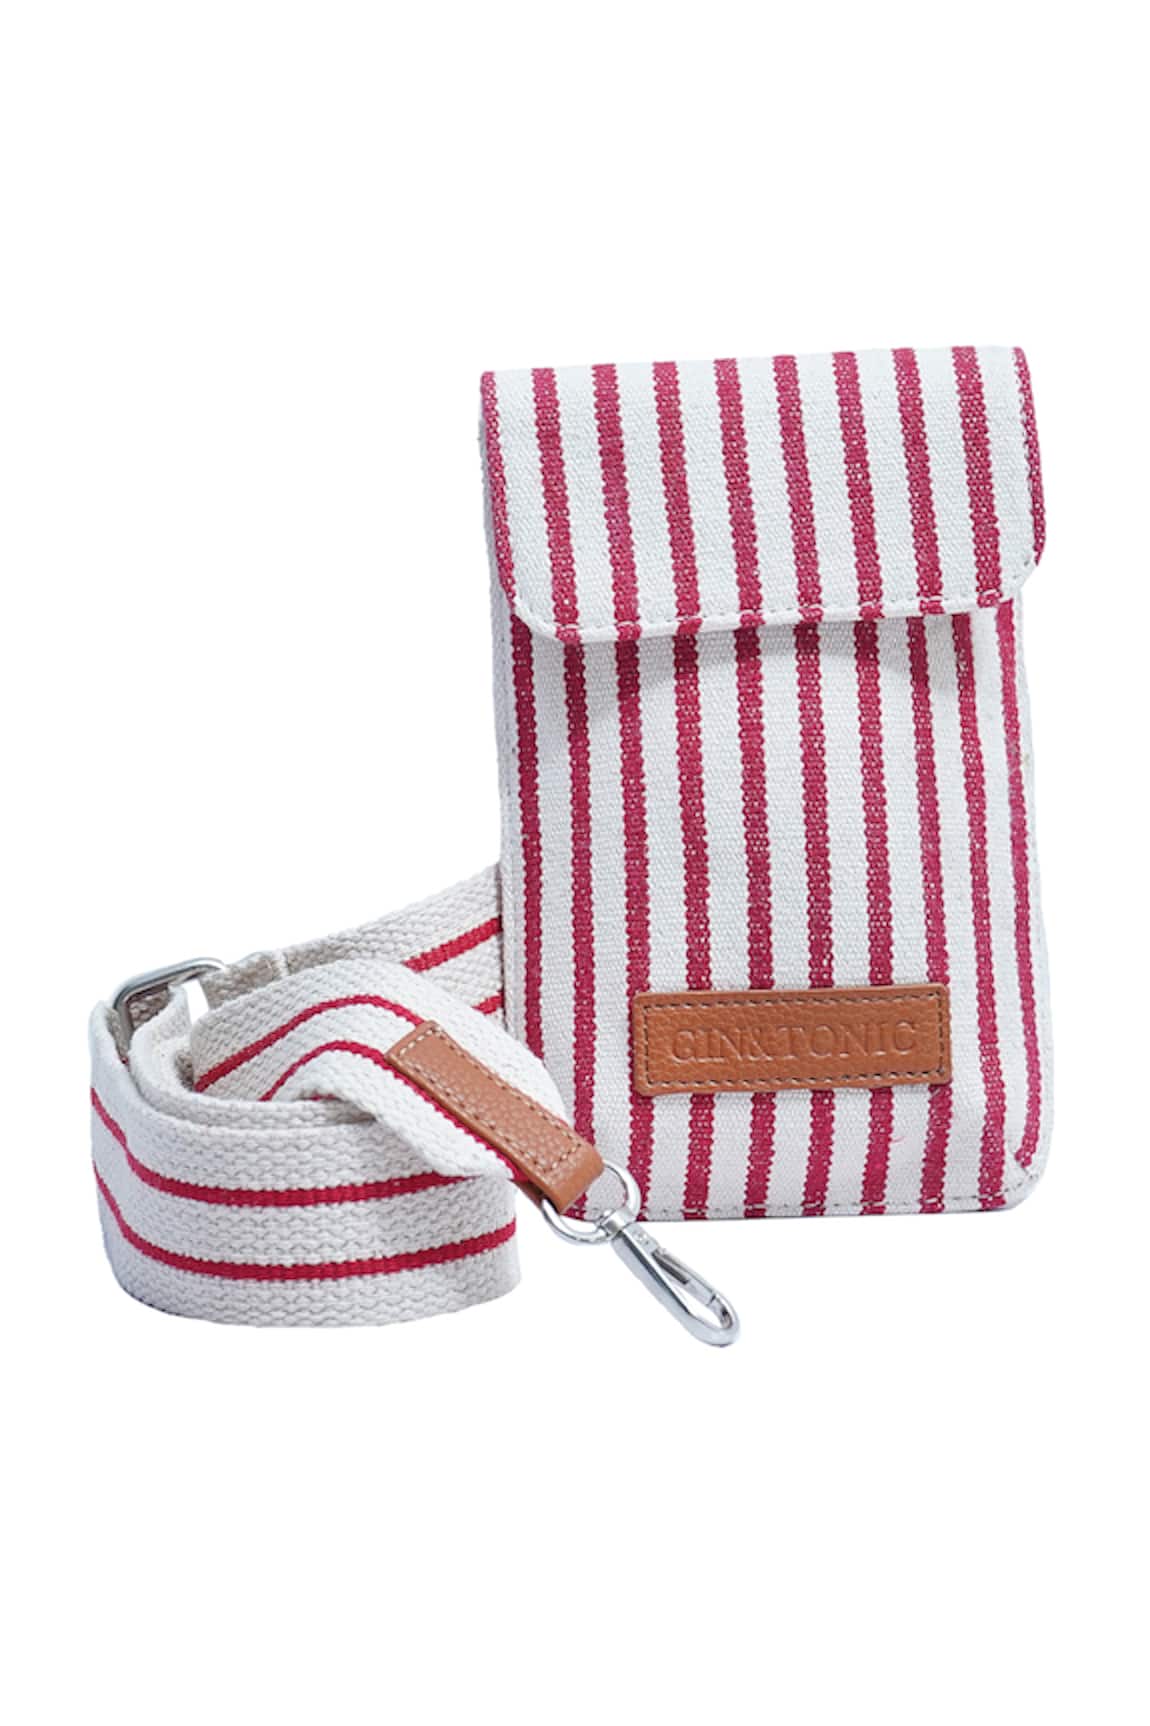 Gin & Tonic Jacquard Striped Mobile Pouch